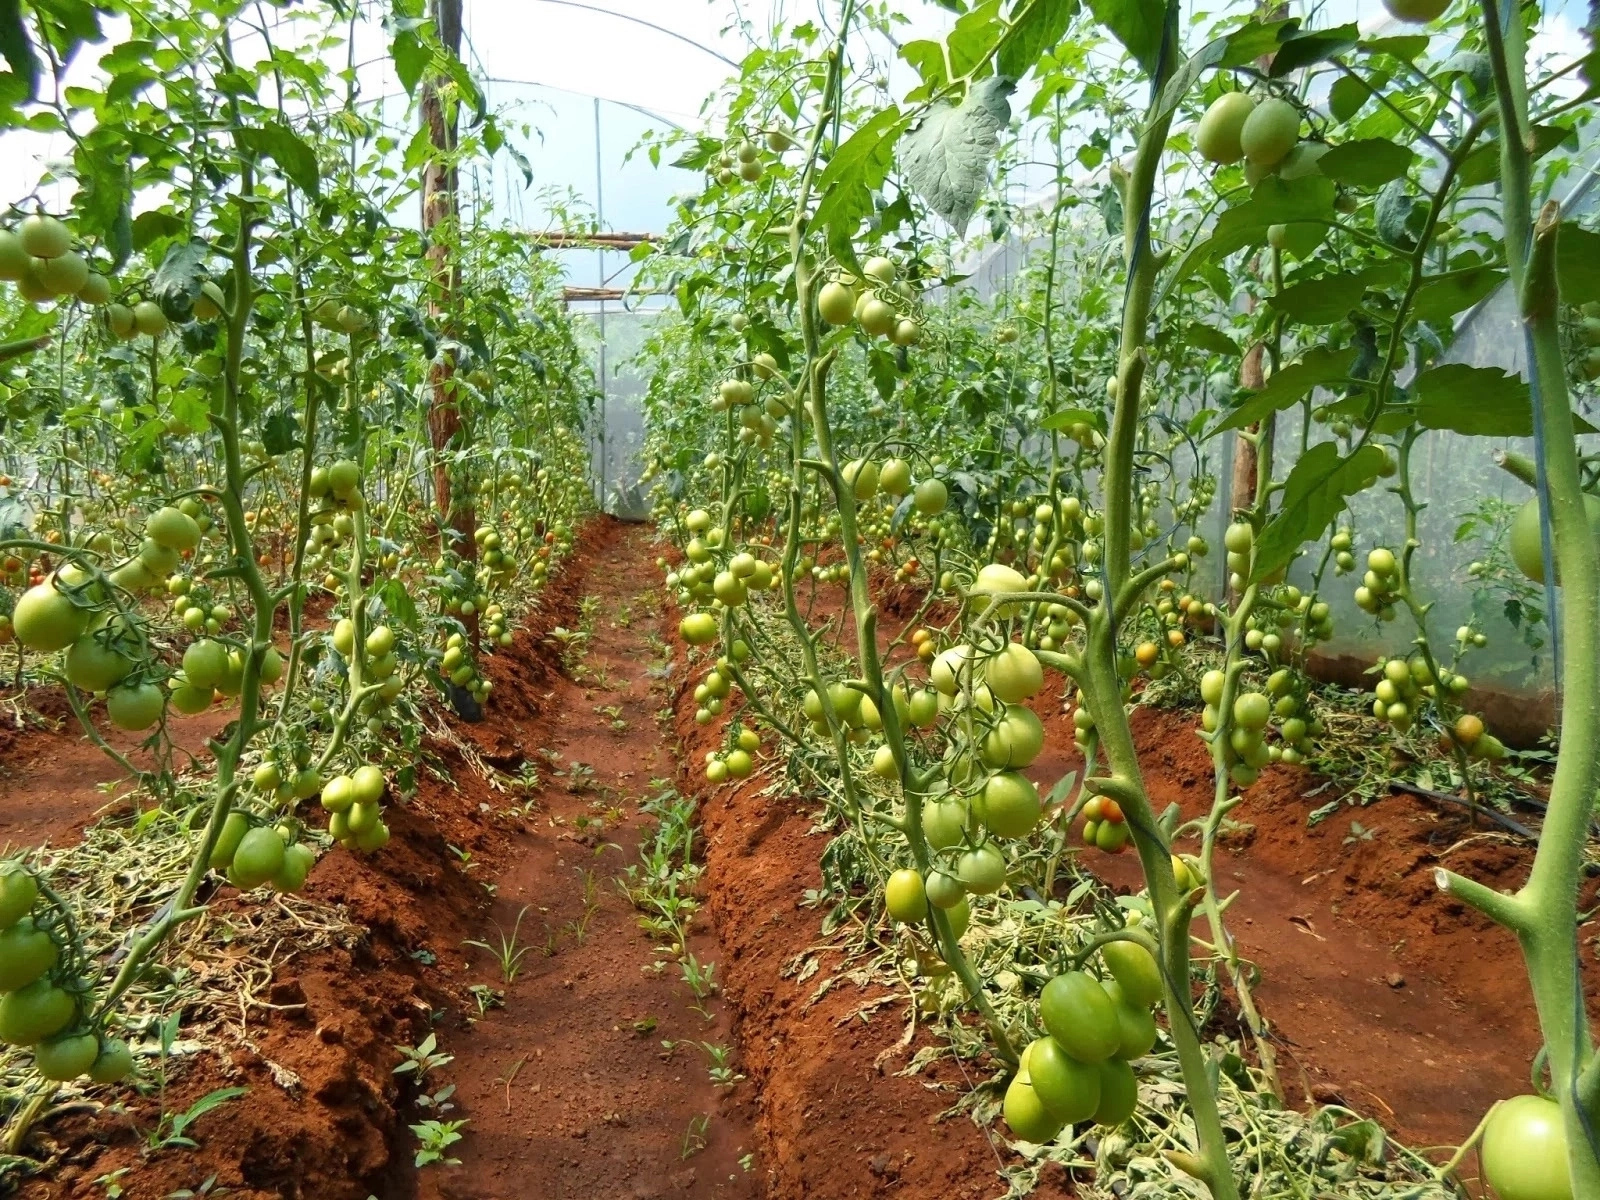 Steps To Start Garden Egg Farming Business In Nigeria And Tips To Succeed (do not publish)